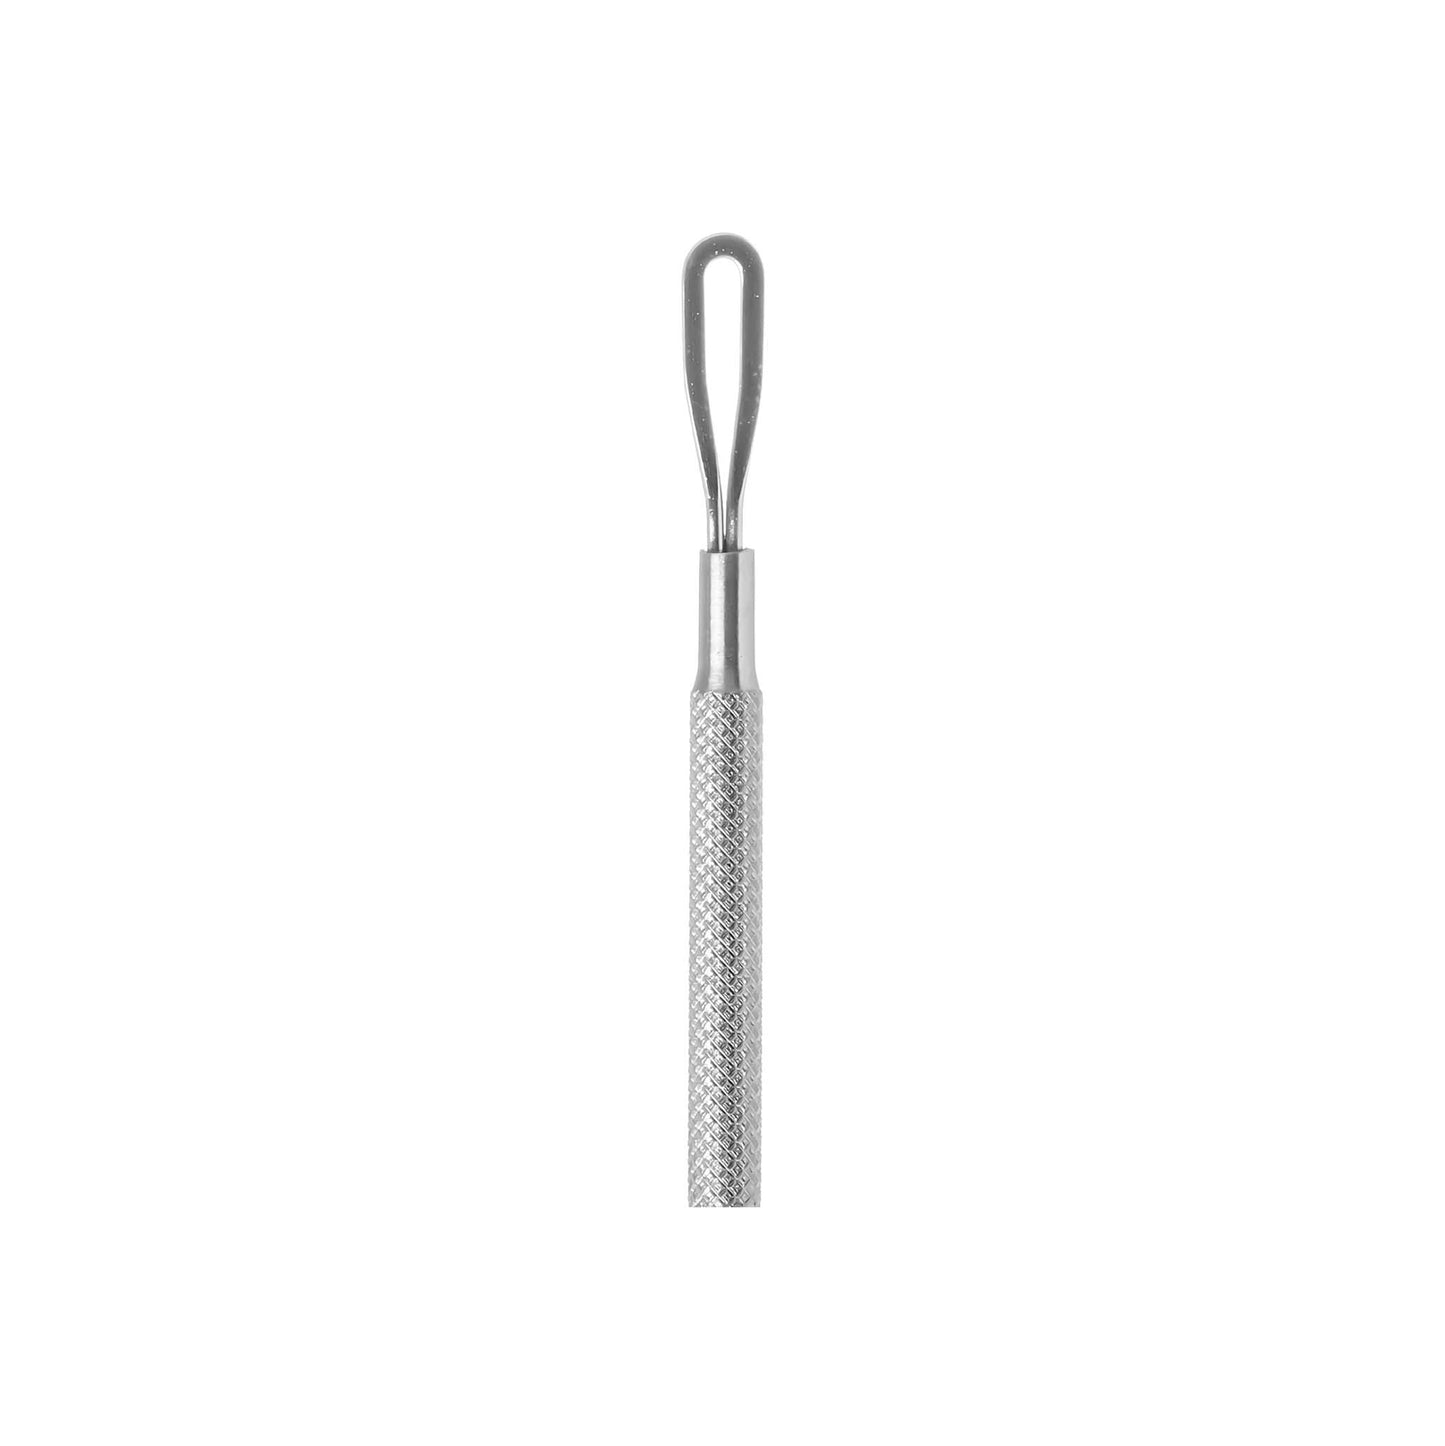 KISS Two Way Black Head Remover (BHC01)